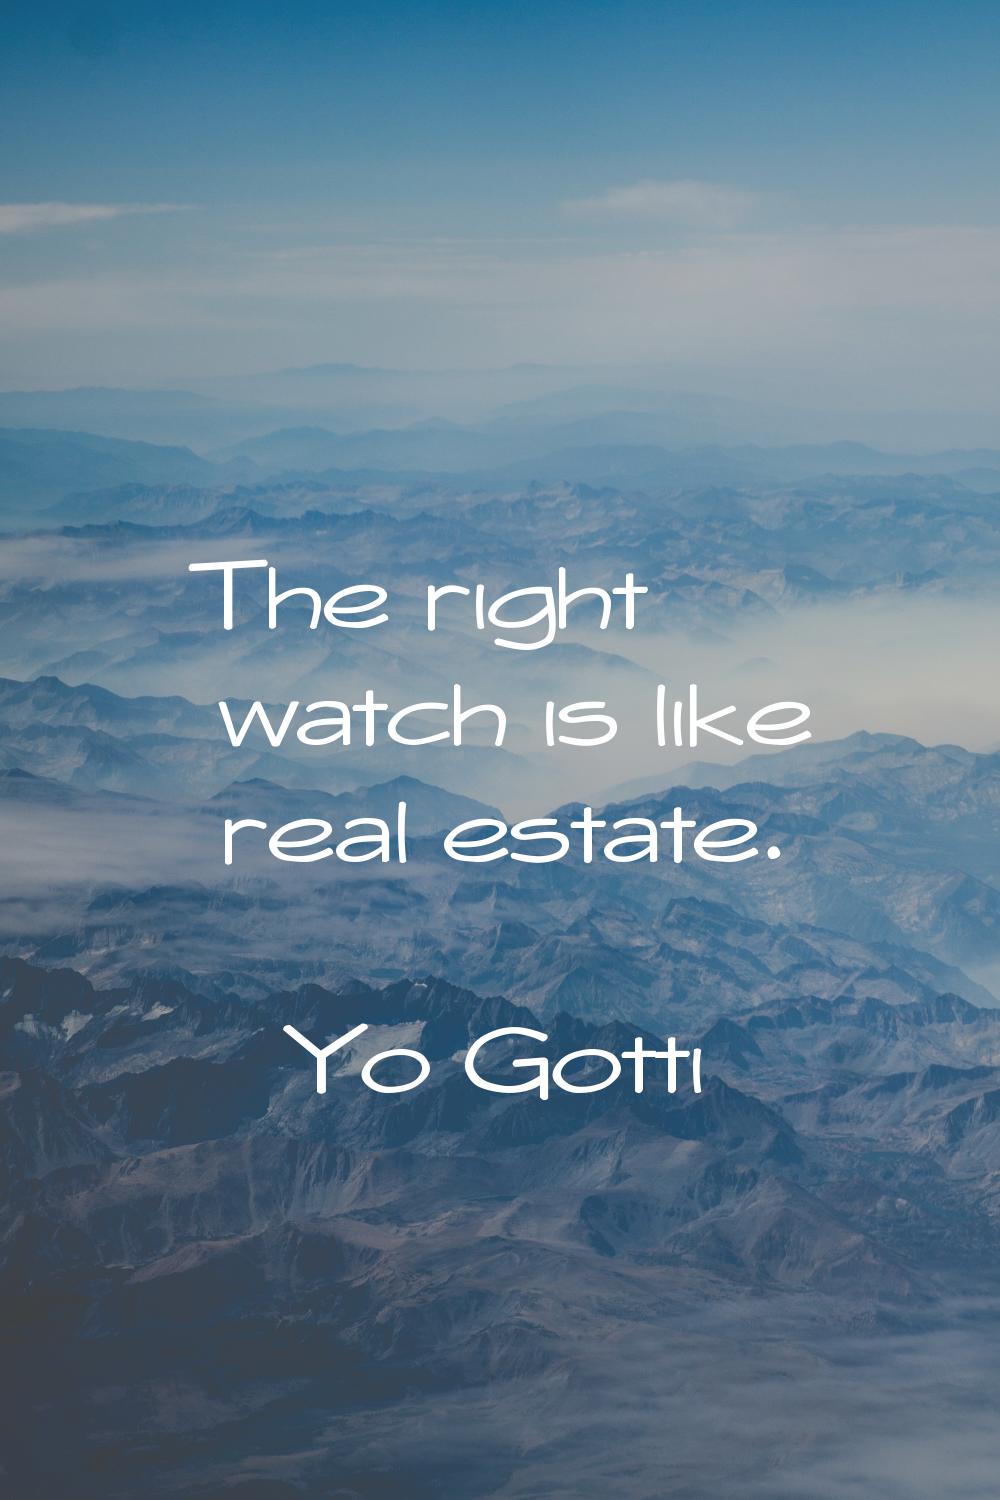 The right watch is like real estate.